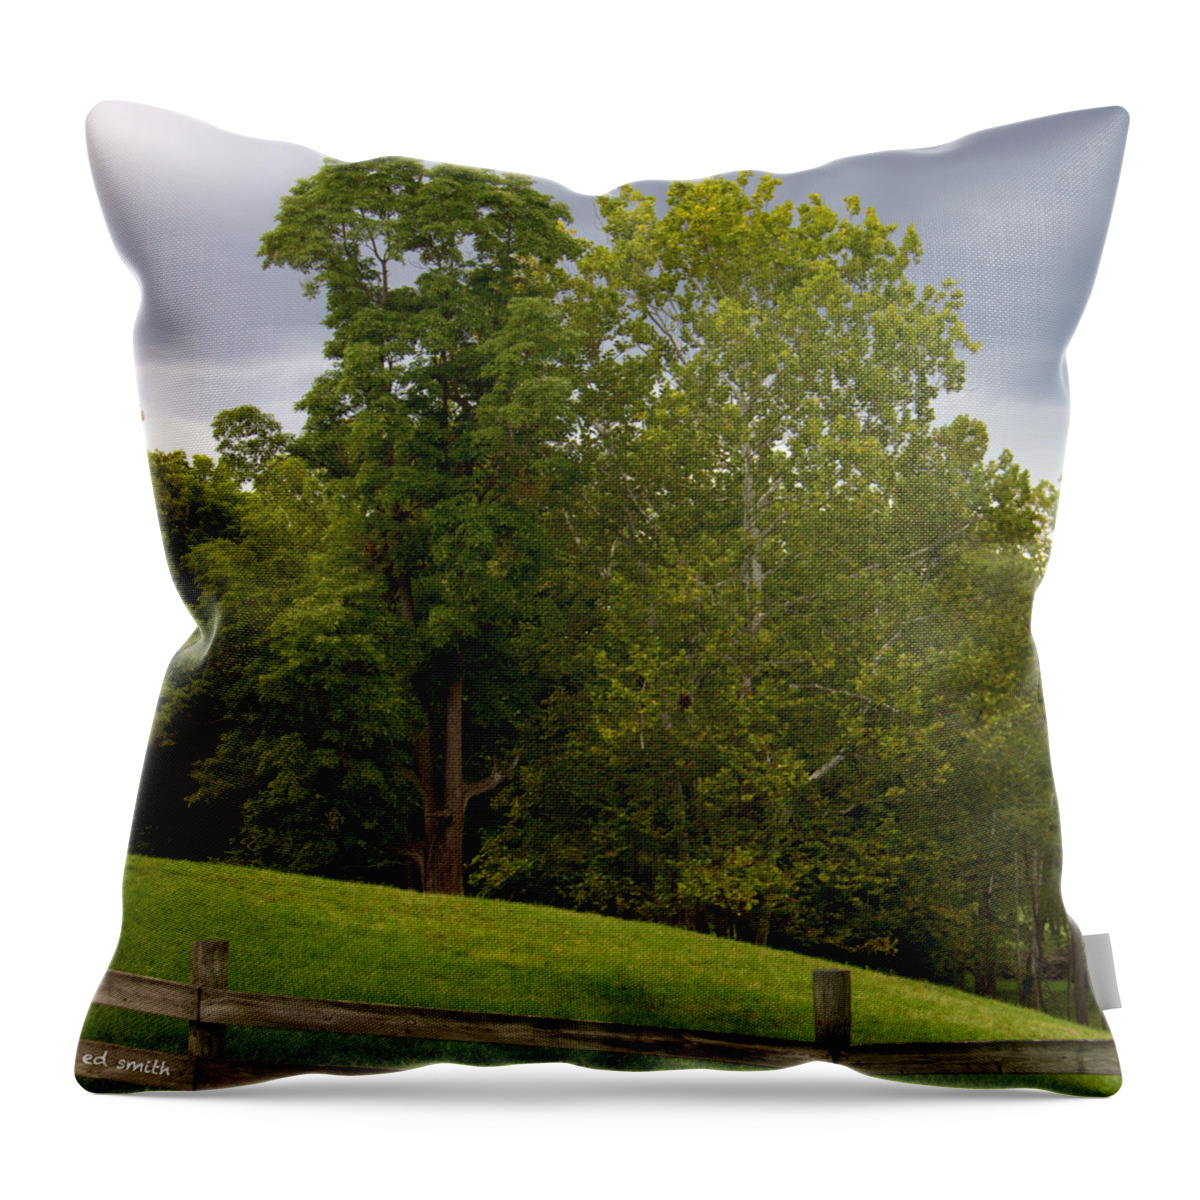 Spring Green Throw Pillow featuring the photograph Spring Green by Edward Smith